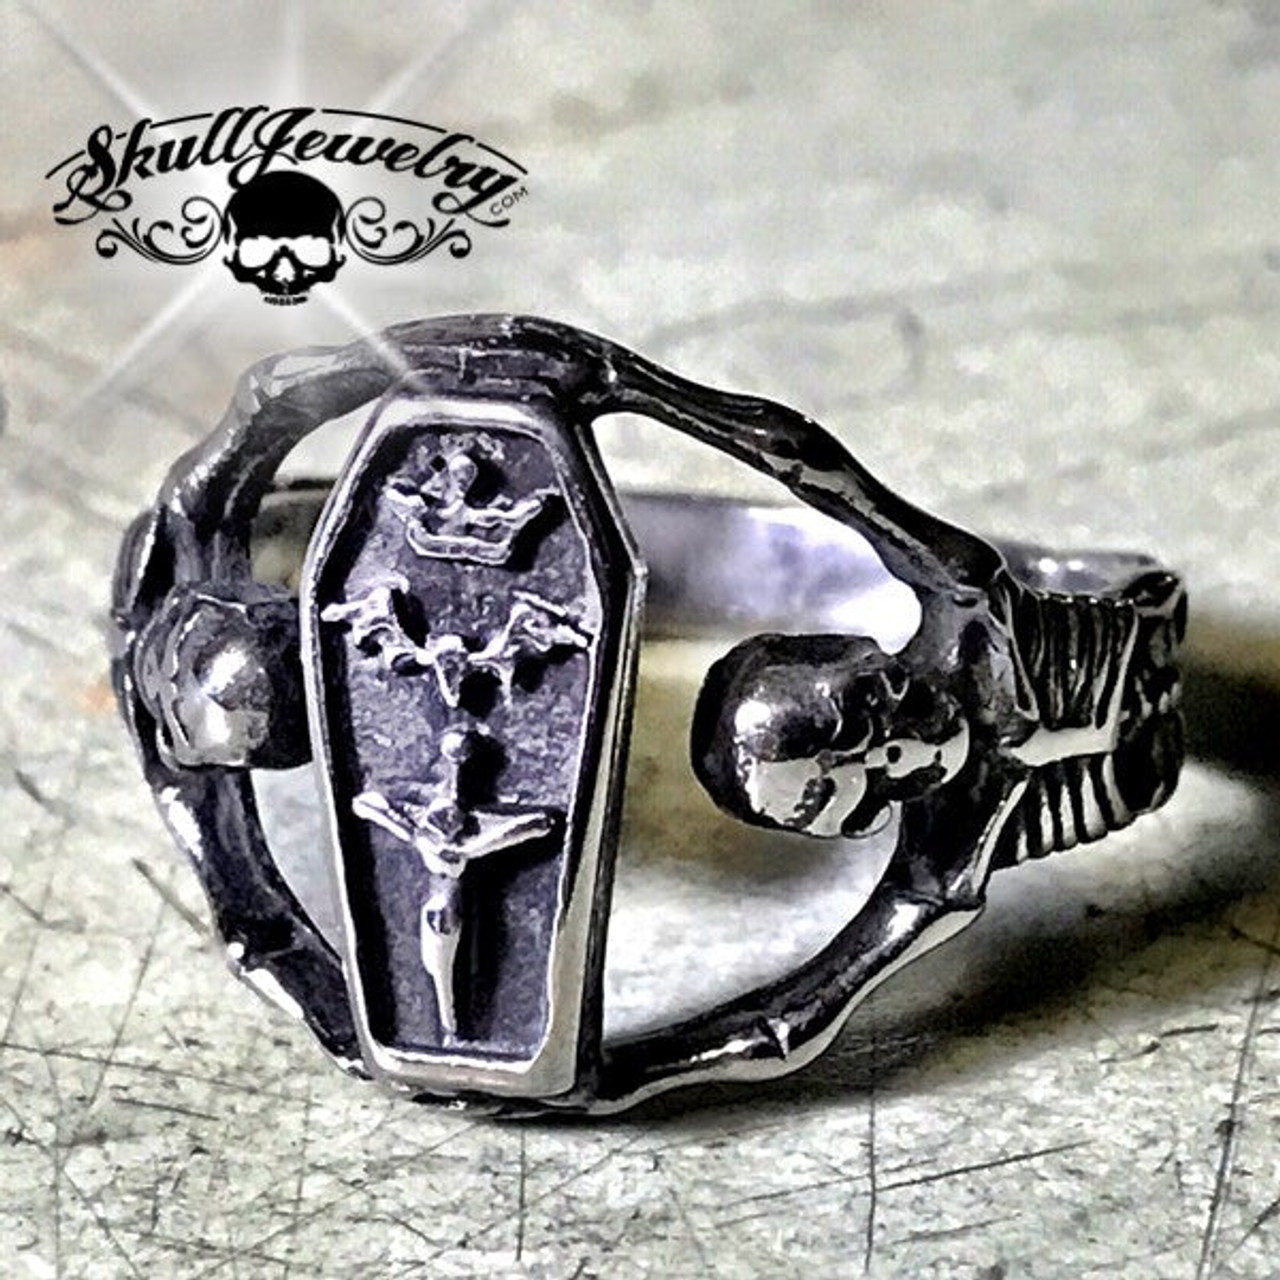 625 Hold Strong Coffin Skeleton Ring 04022.1640272214